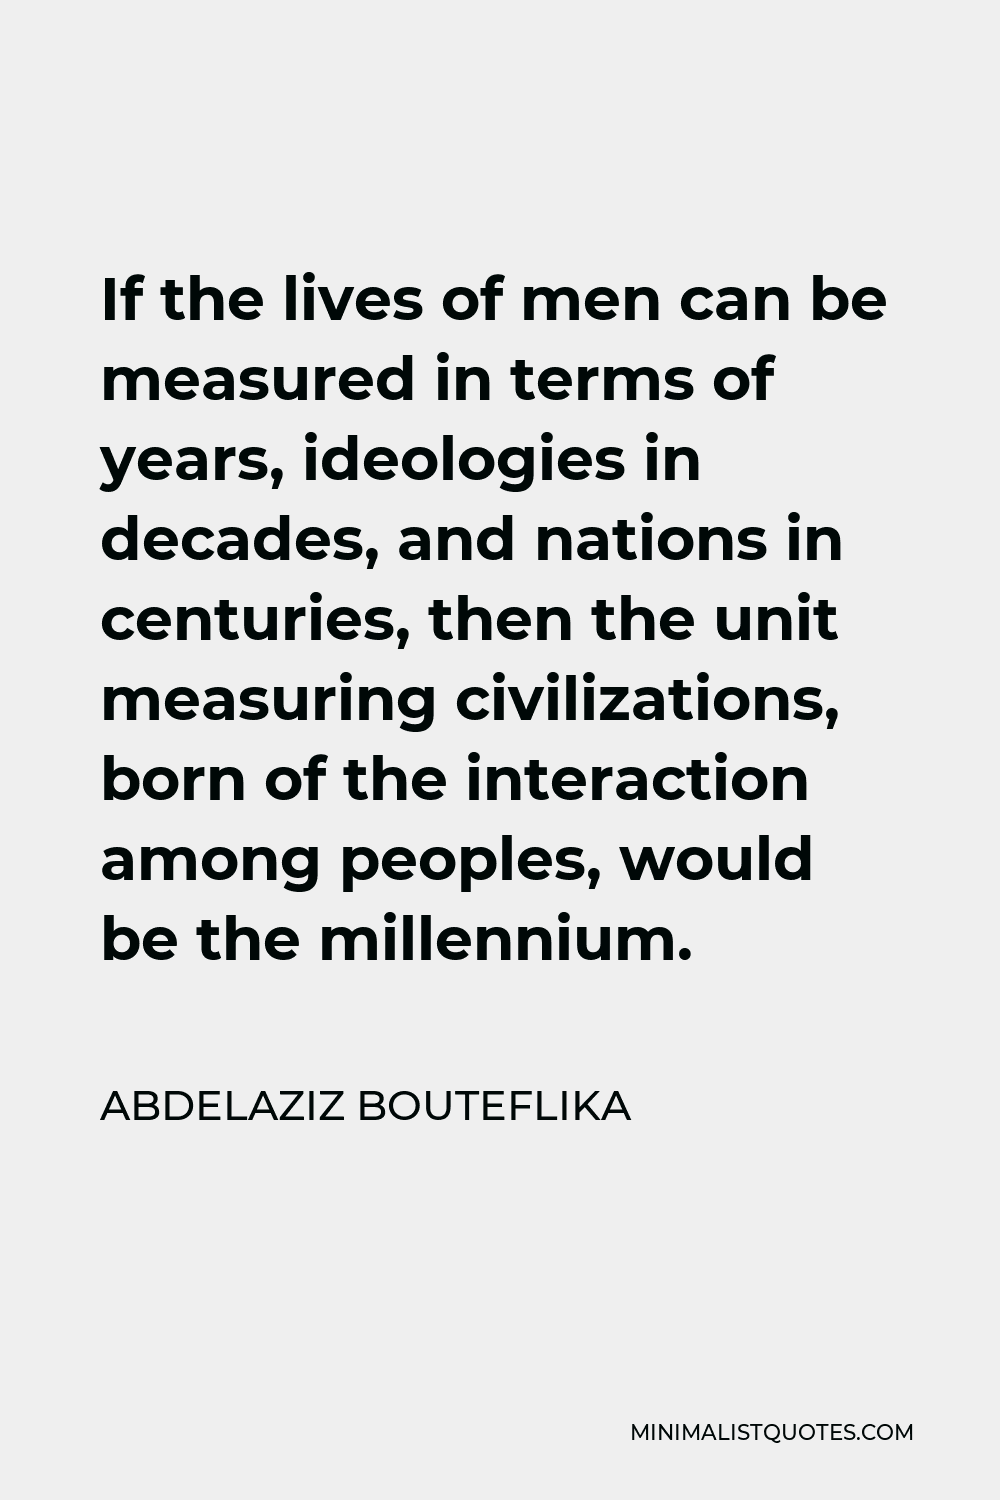 Abdelaziz Bouteflika Quote - If the lives of men can be measured in terms of years, ideologies in decades, and nations in centuries, then the unit measuring civilizations, born of the interaction among peoples, would be the millennium.